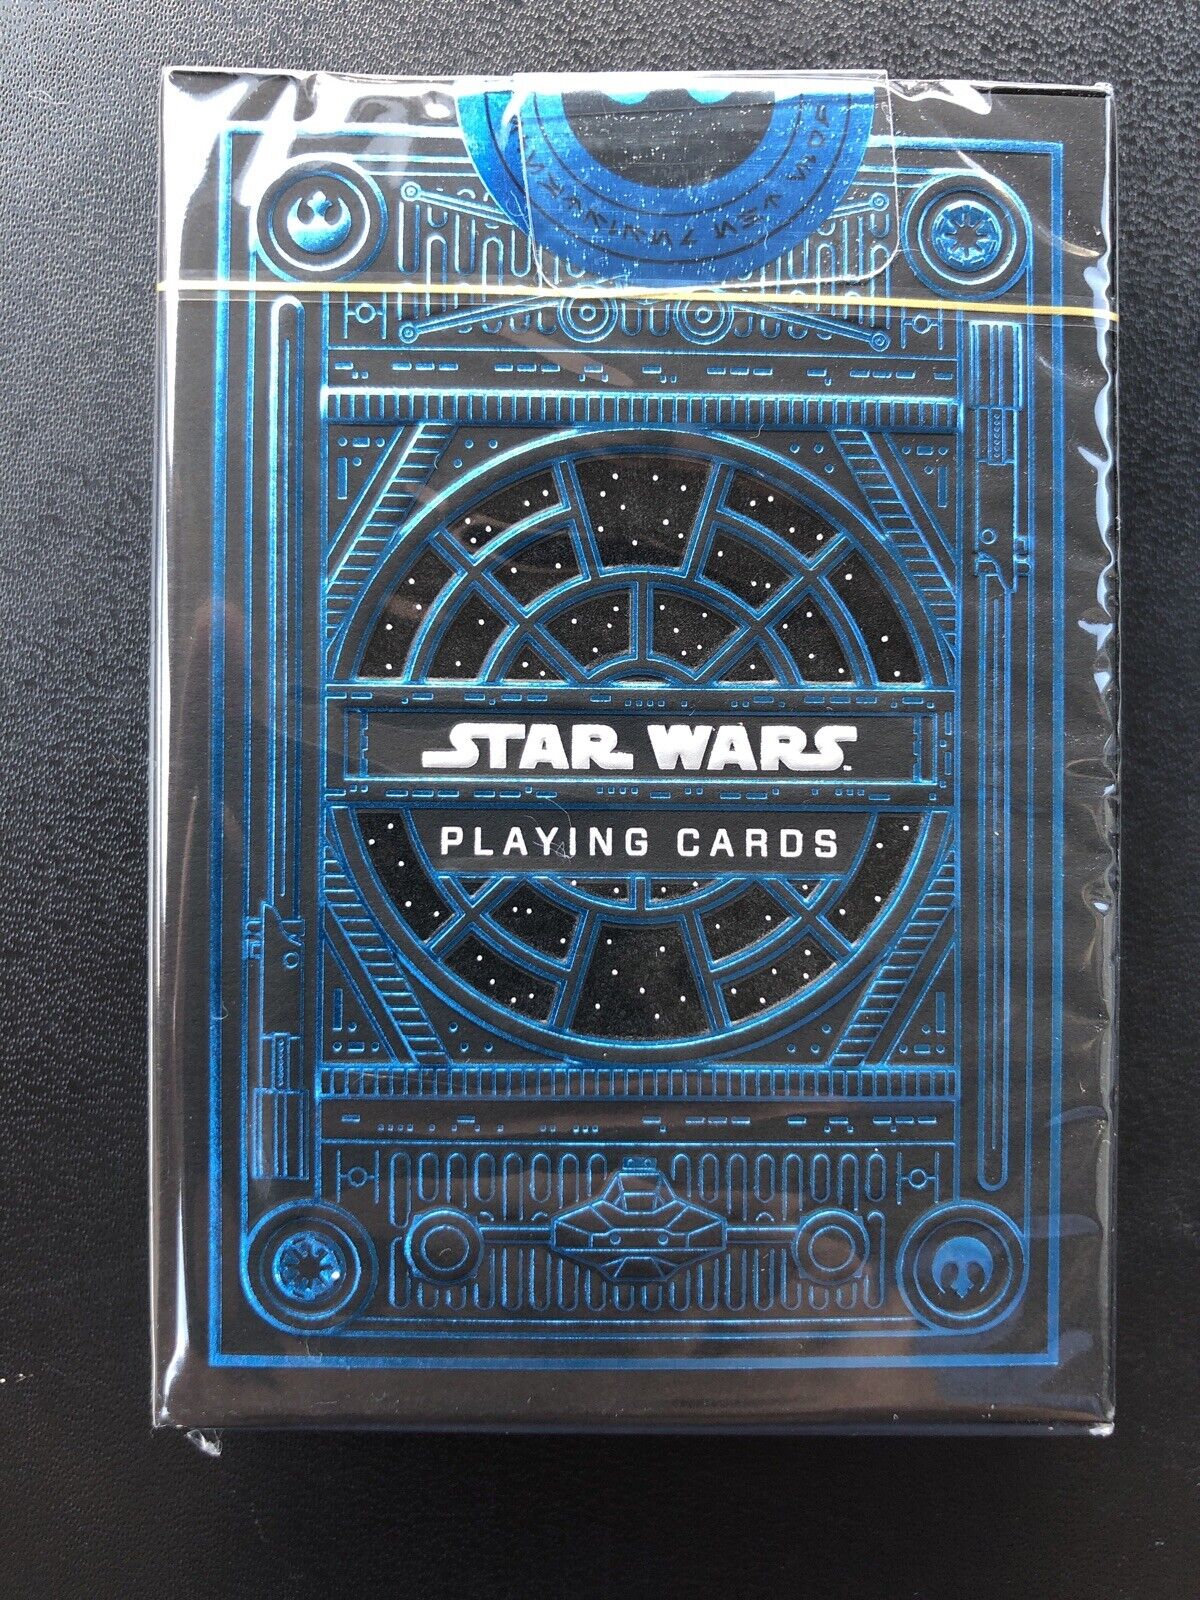 Star Wars Light Side (BLUE) Playing Cards by theory11 